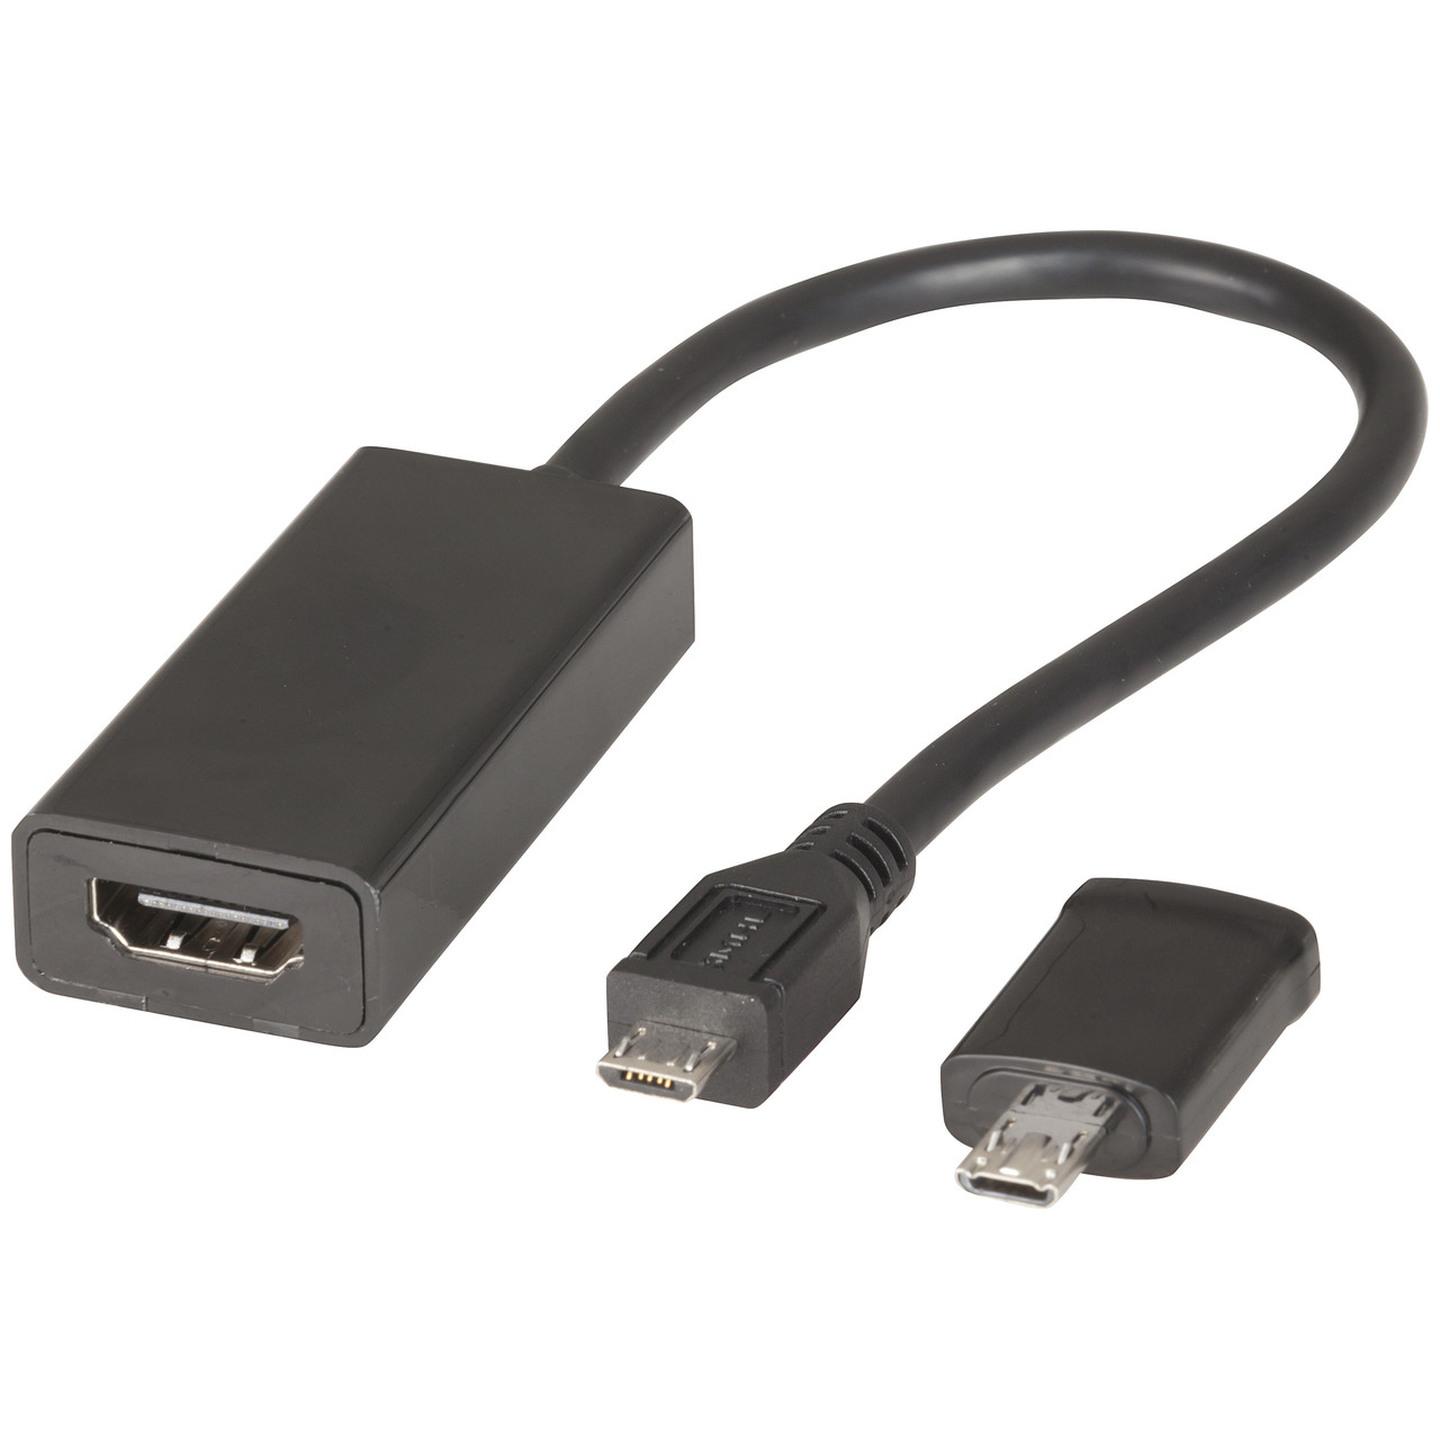 MHL to HDMI Converter with 11 Pin Samsung Adaptor